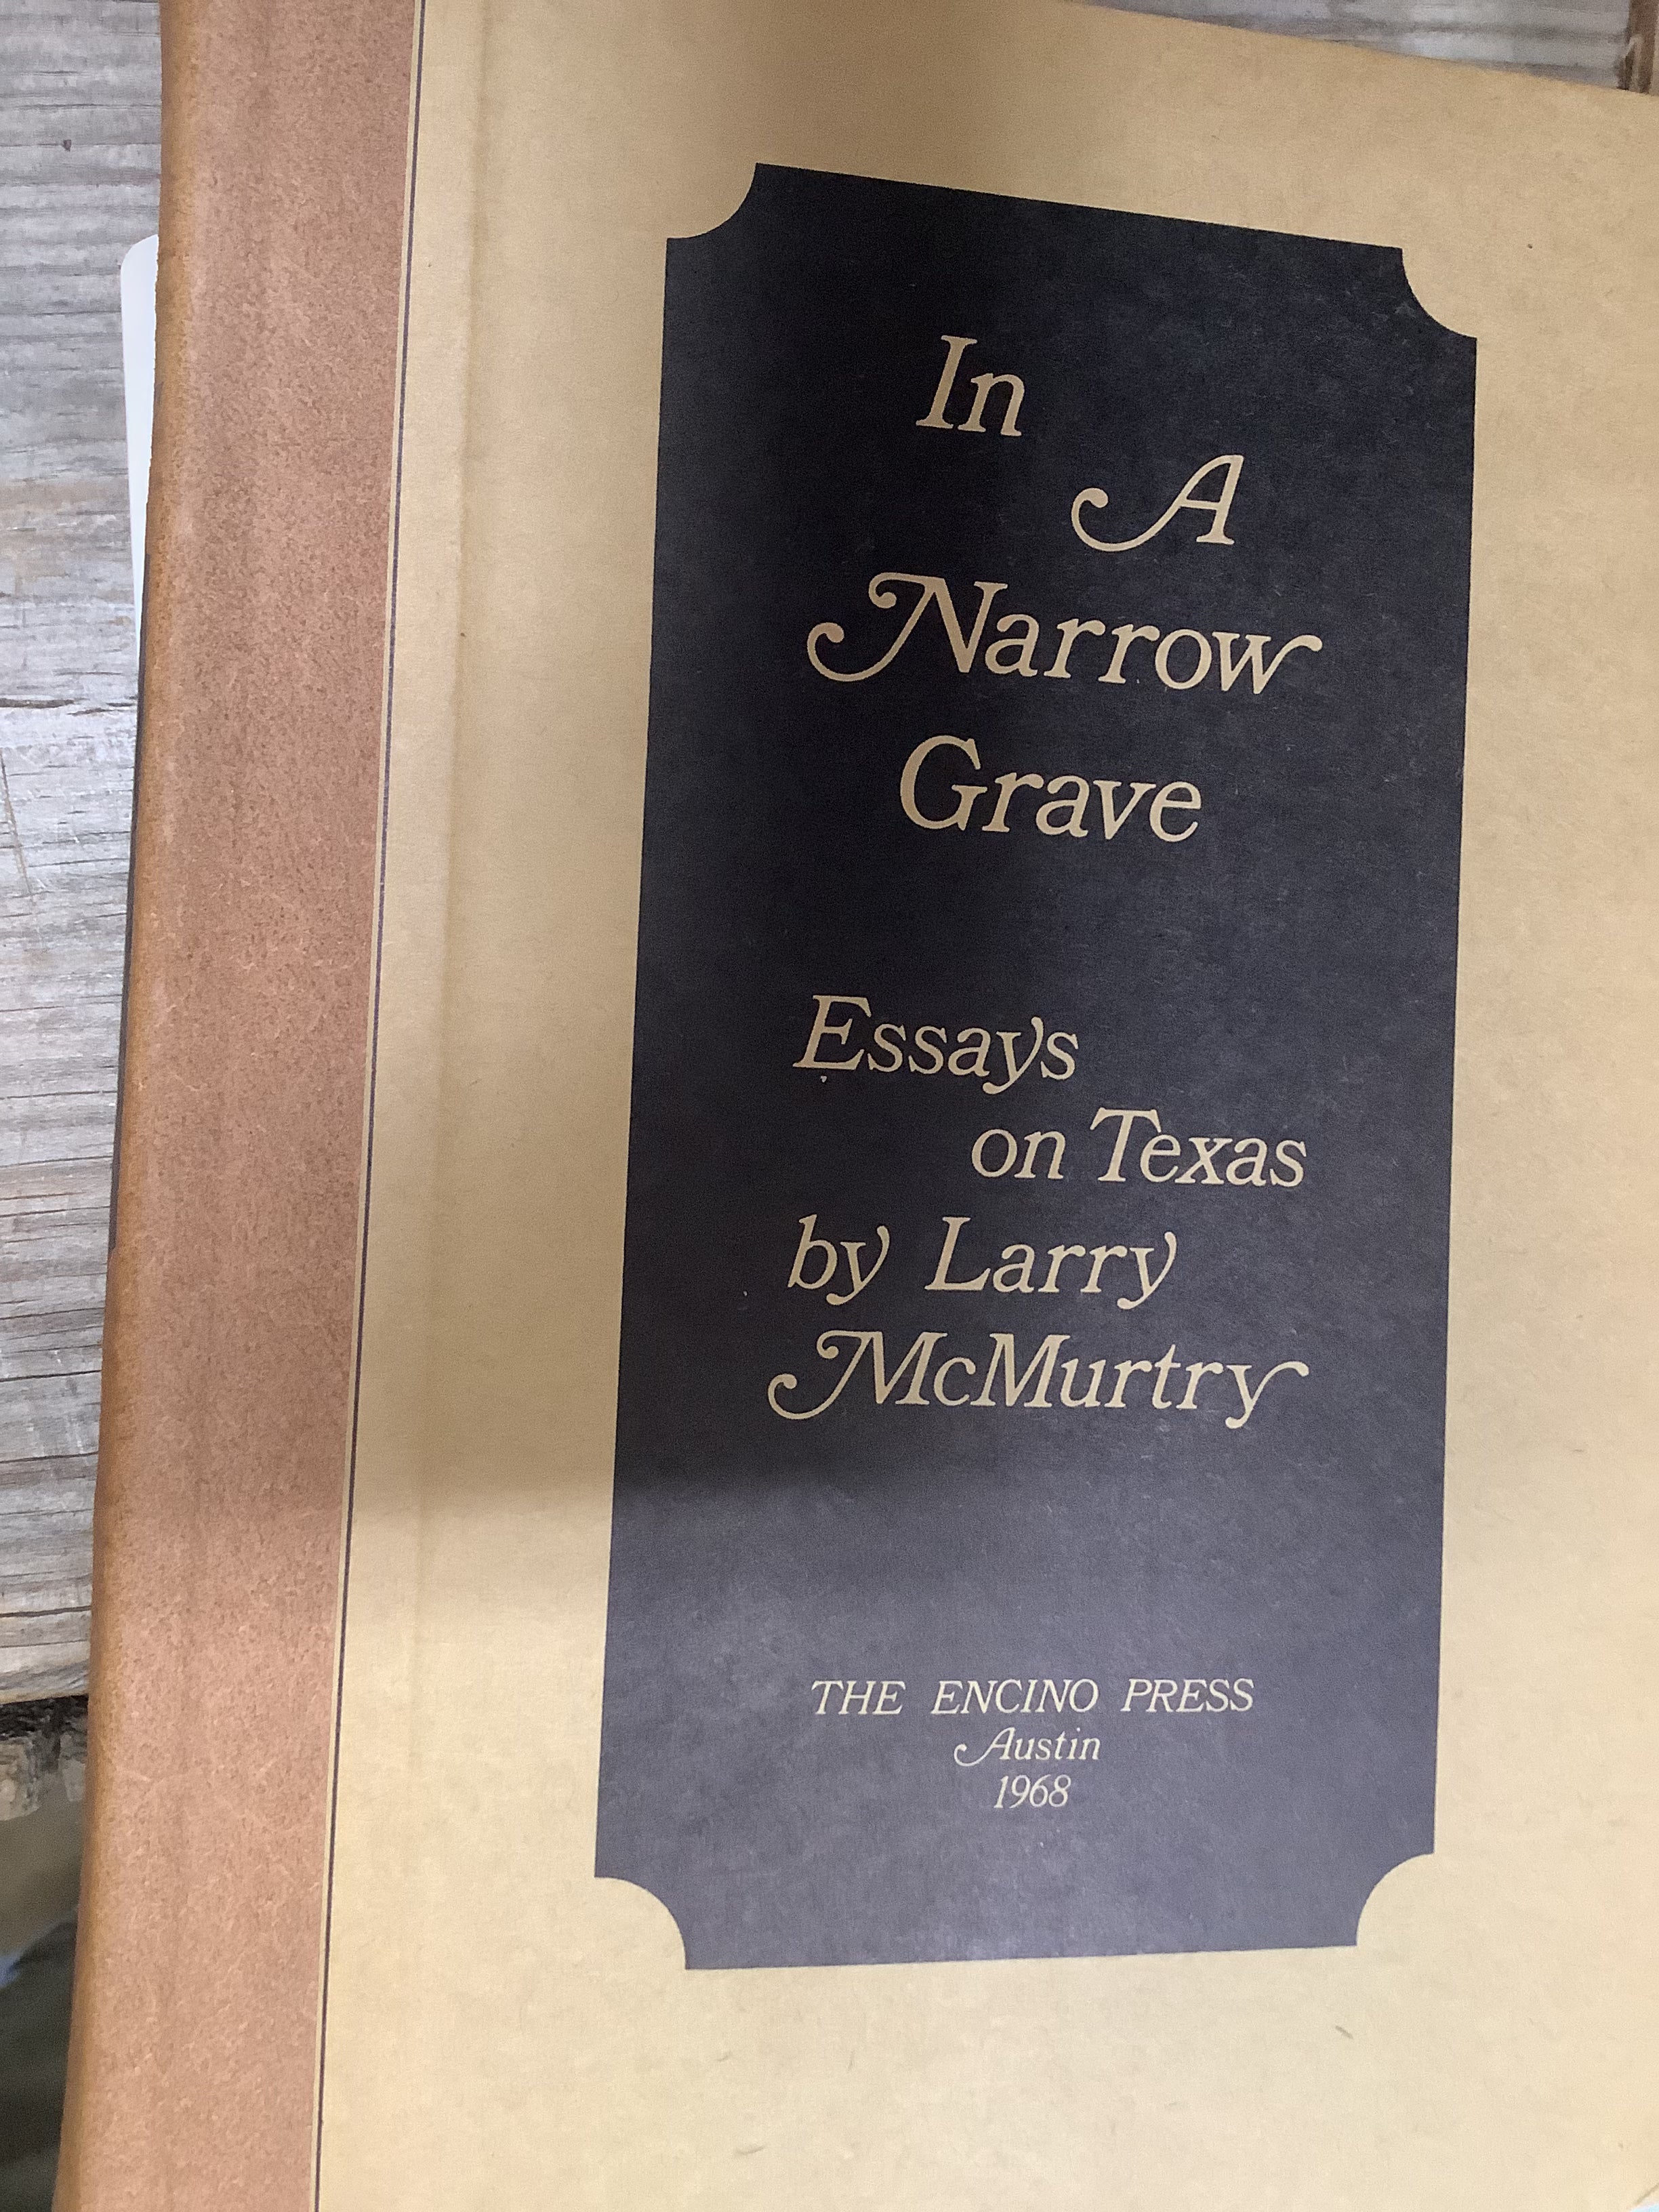 BOOKs - Larry McMurtry signed - In A Narrow Grave